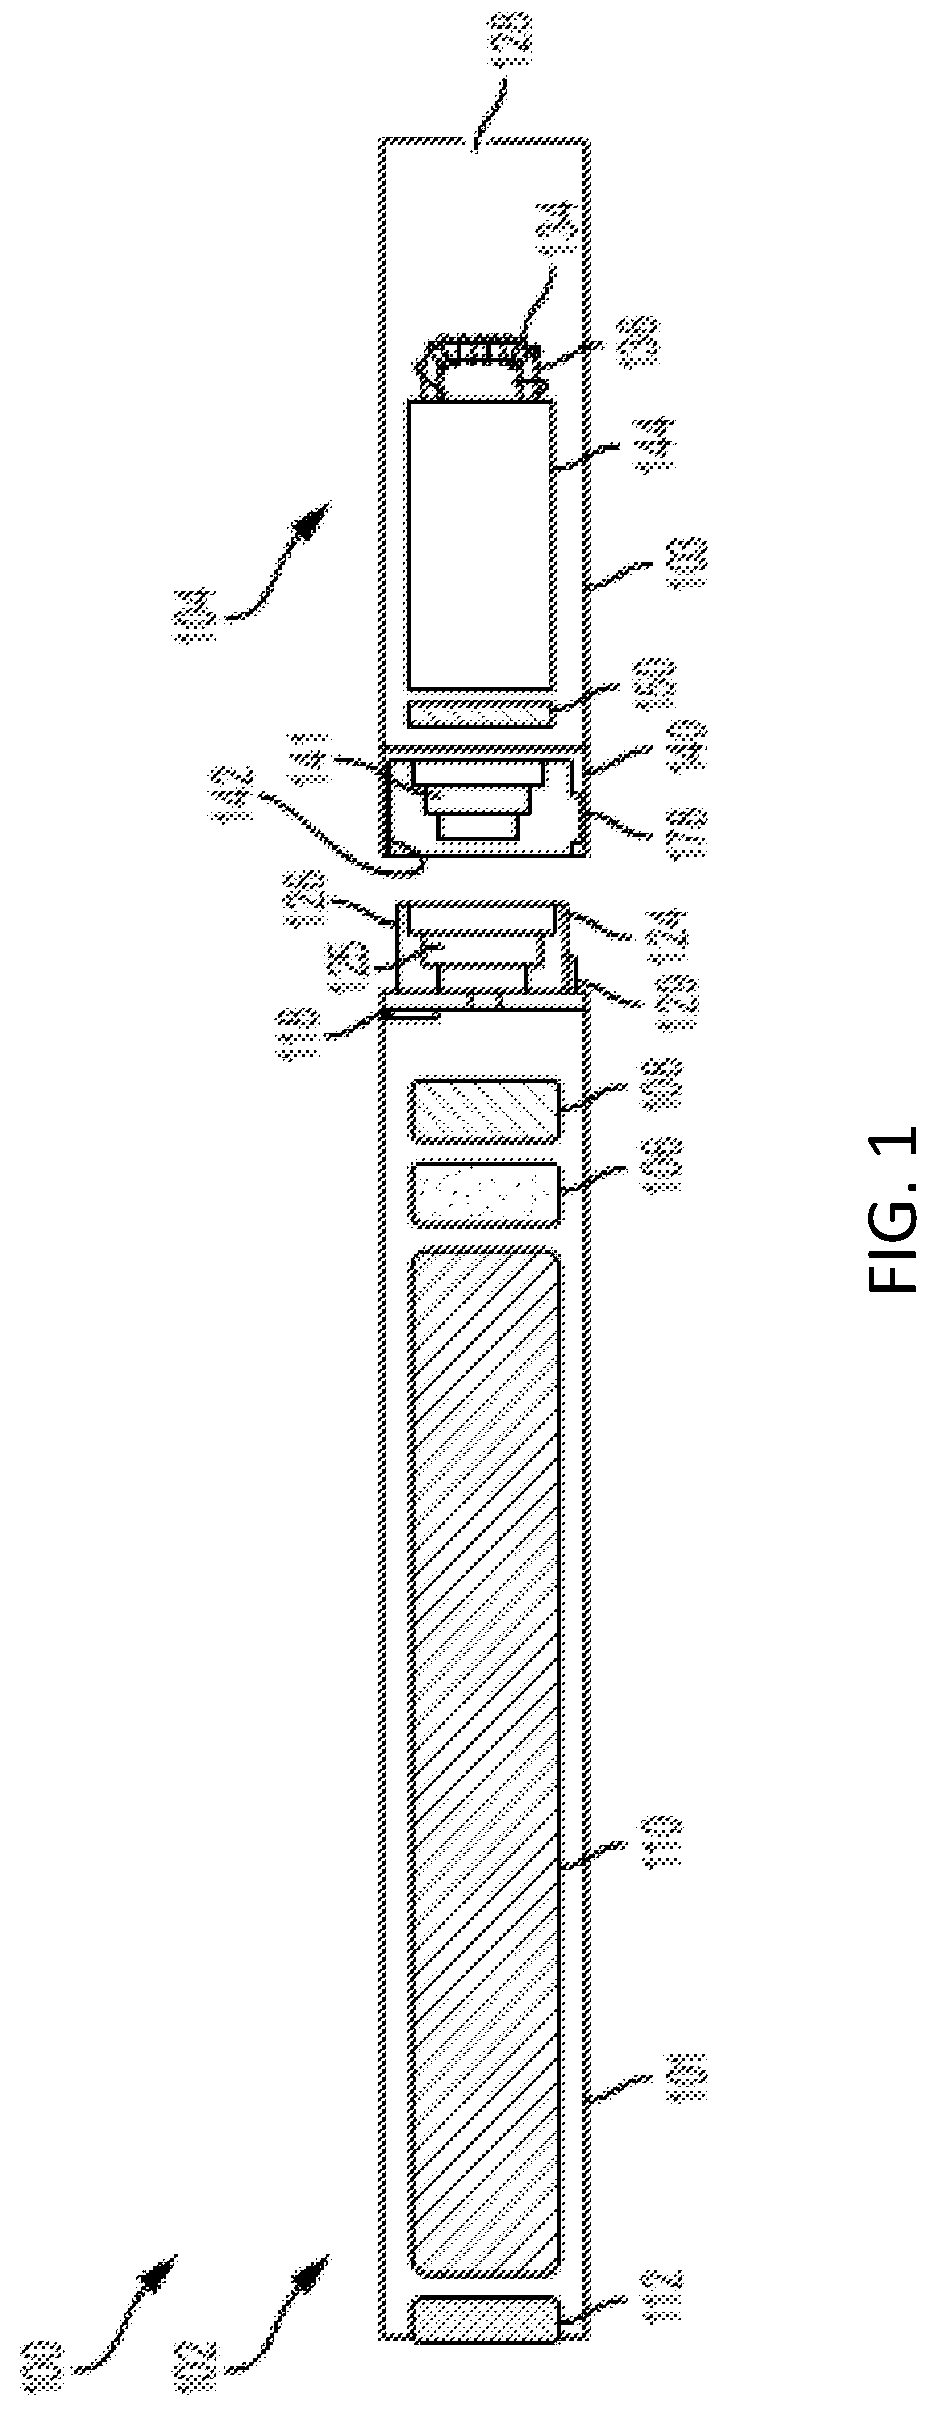 Aerosol delivery device with improved atomizer